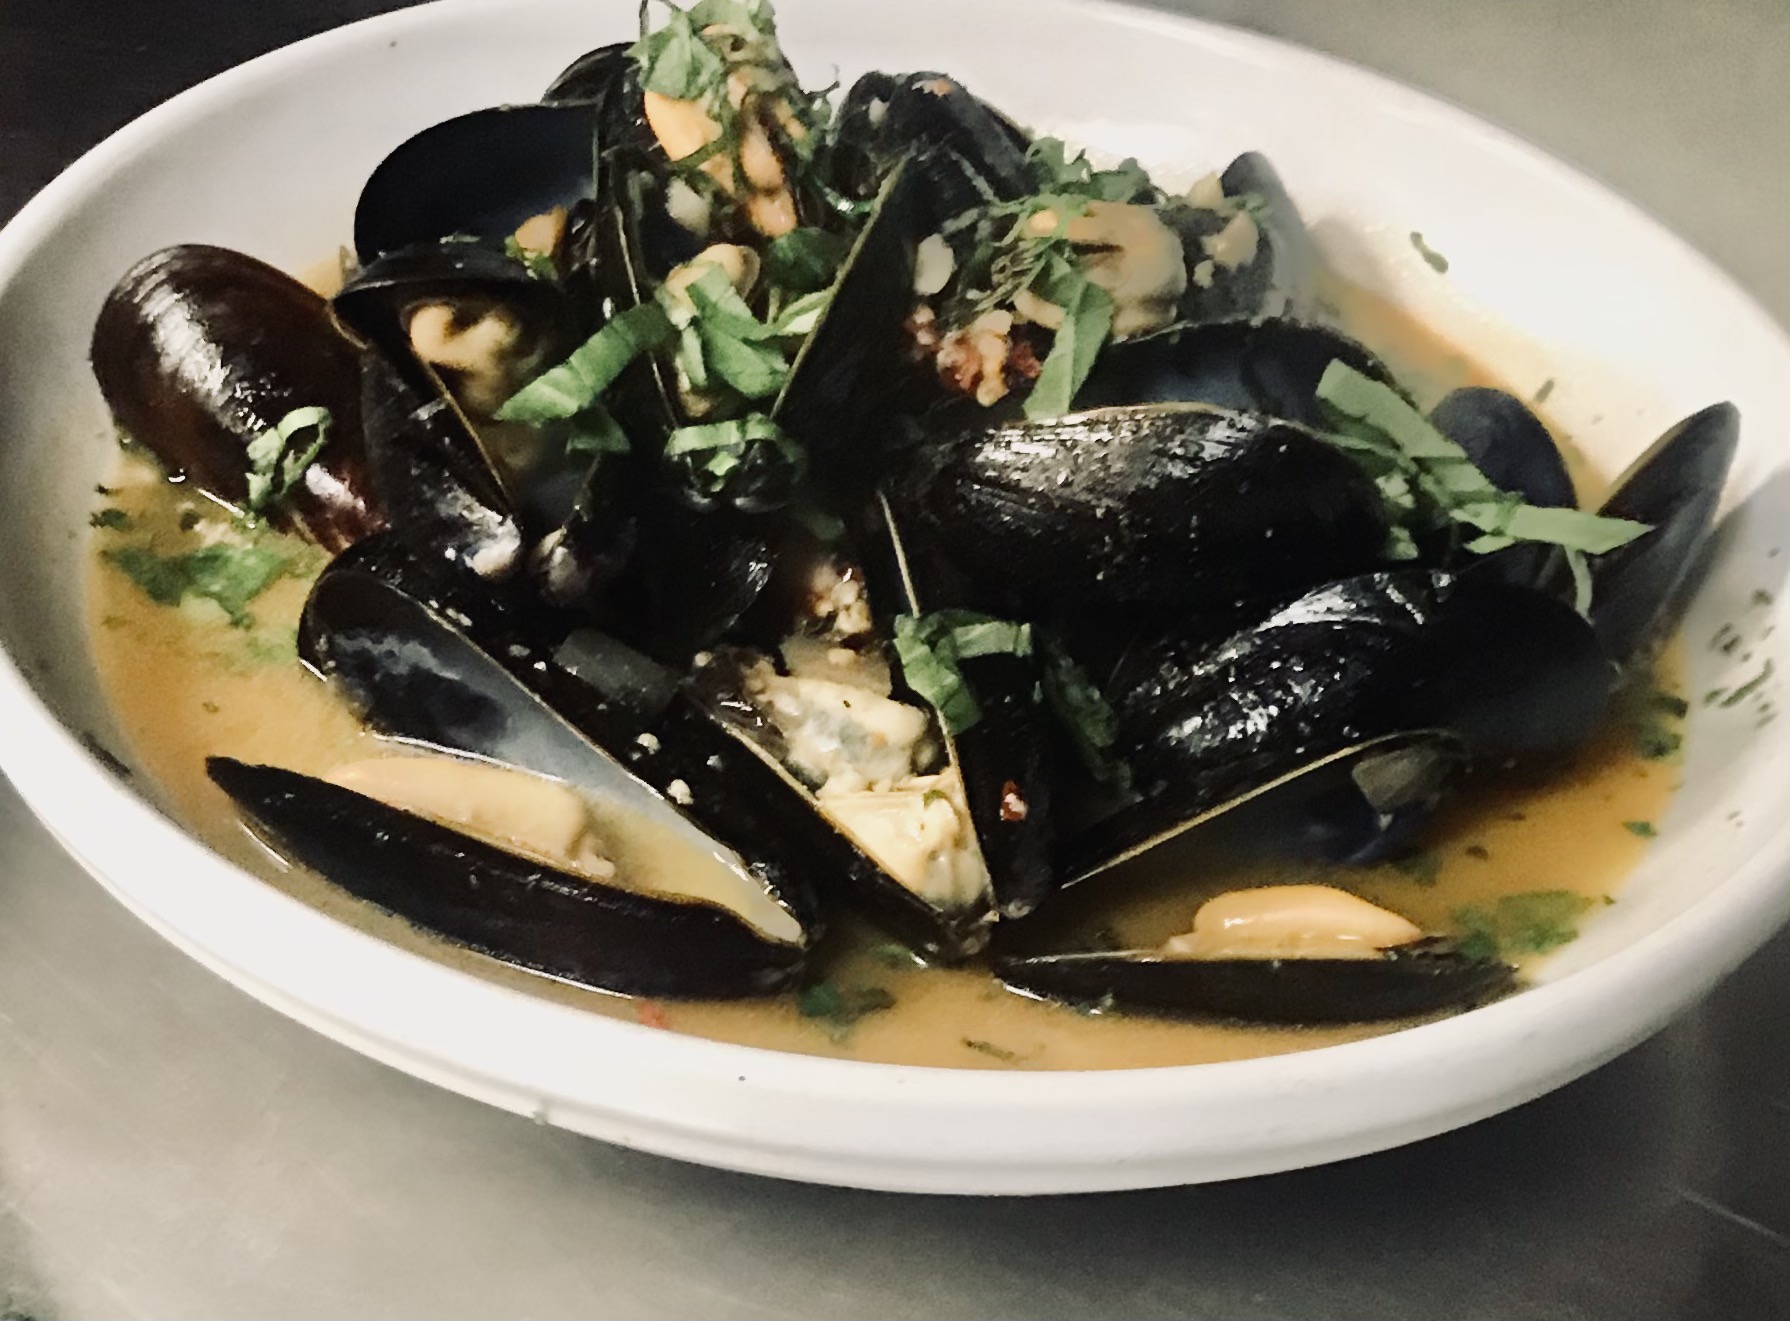 Mussels in a white bowl on a table.